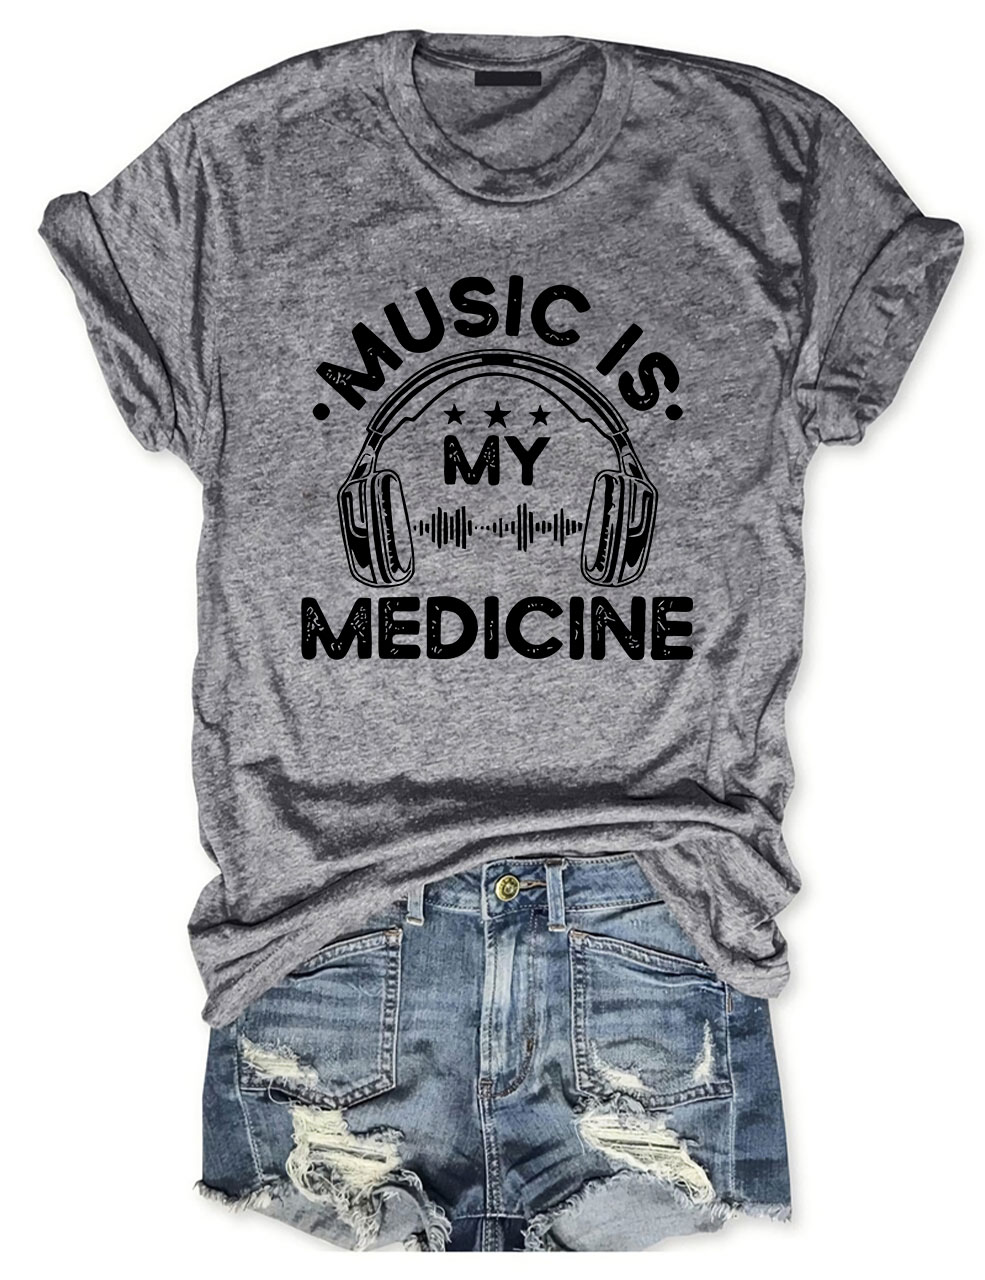 Music is in My MedicineT-shirt